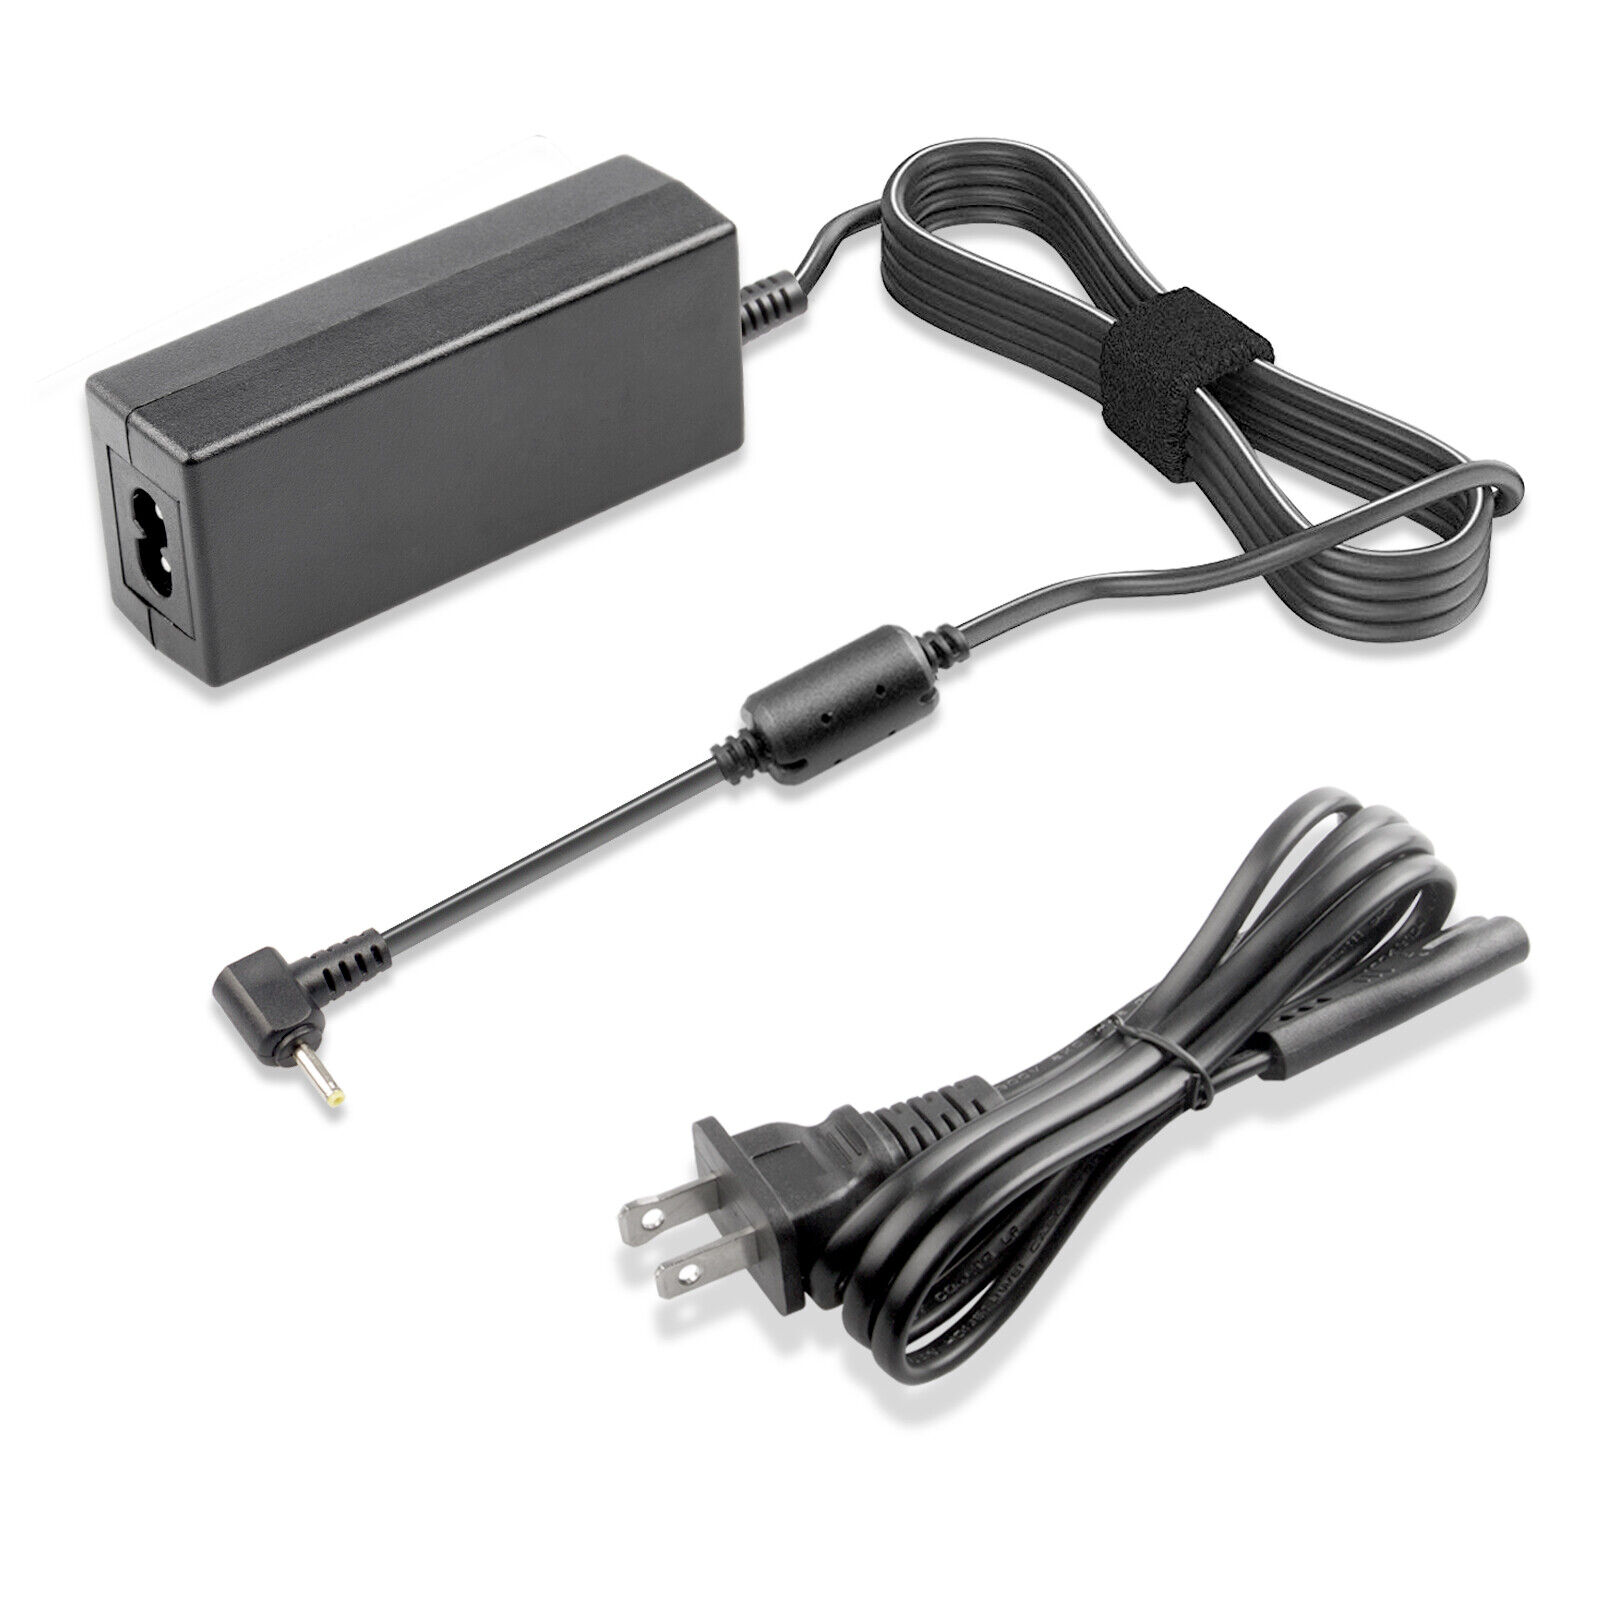 AC Adapter Charger for Samsung Chromebook XE303C12 11.6 Notebook XE303C12-A01US